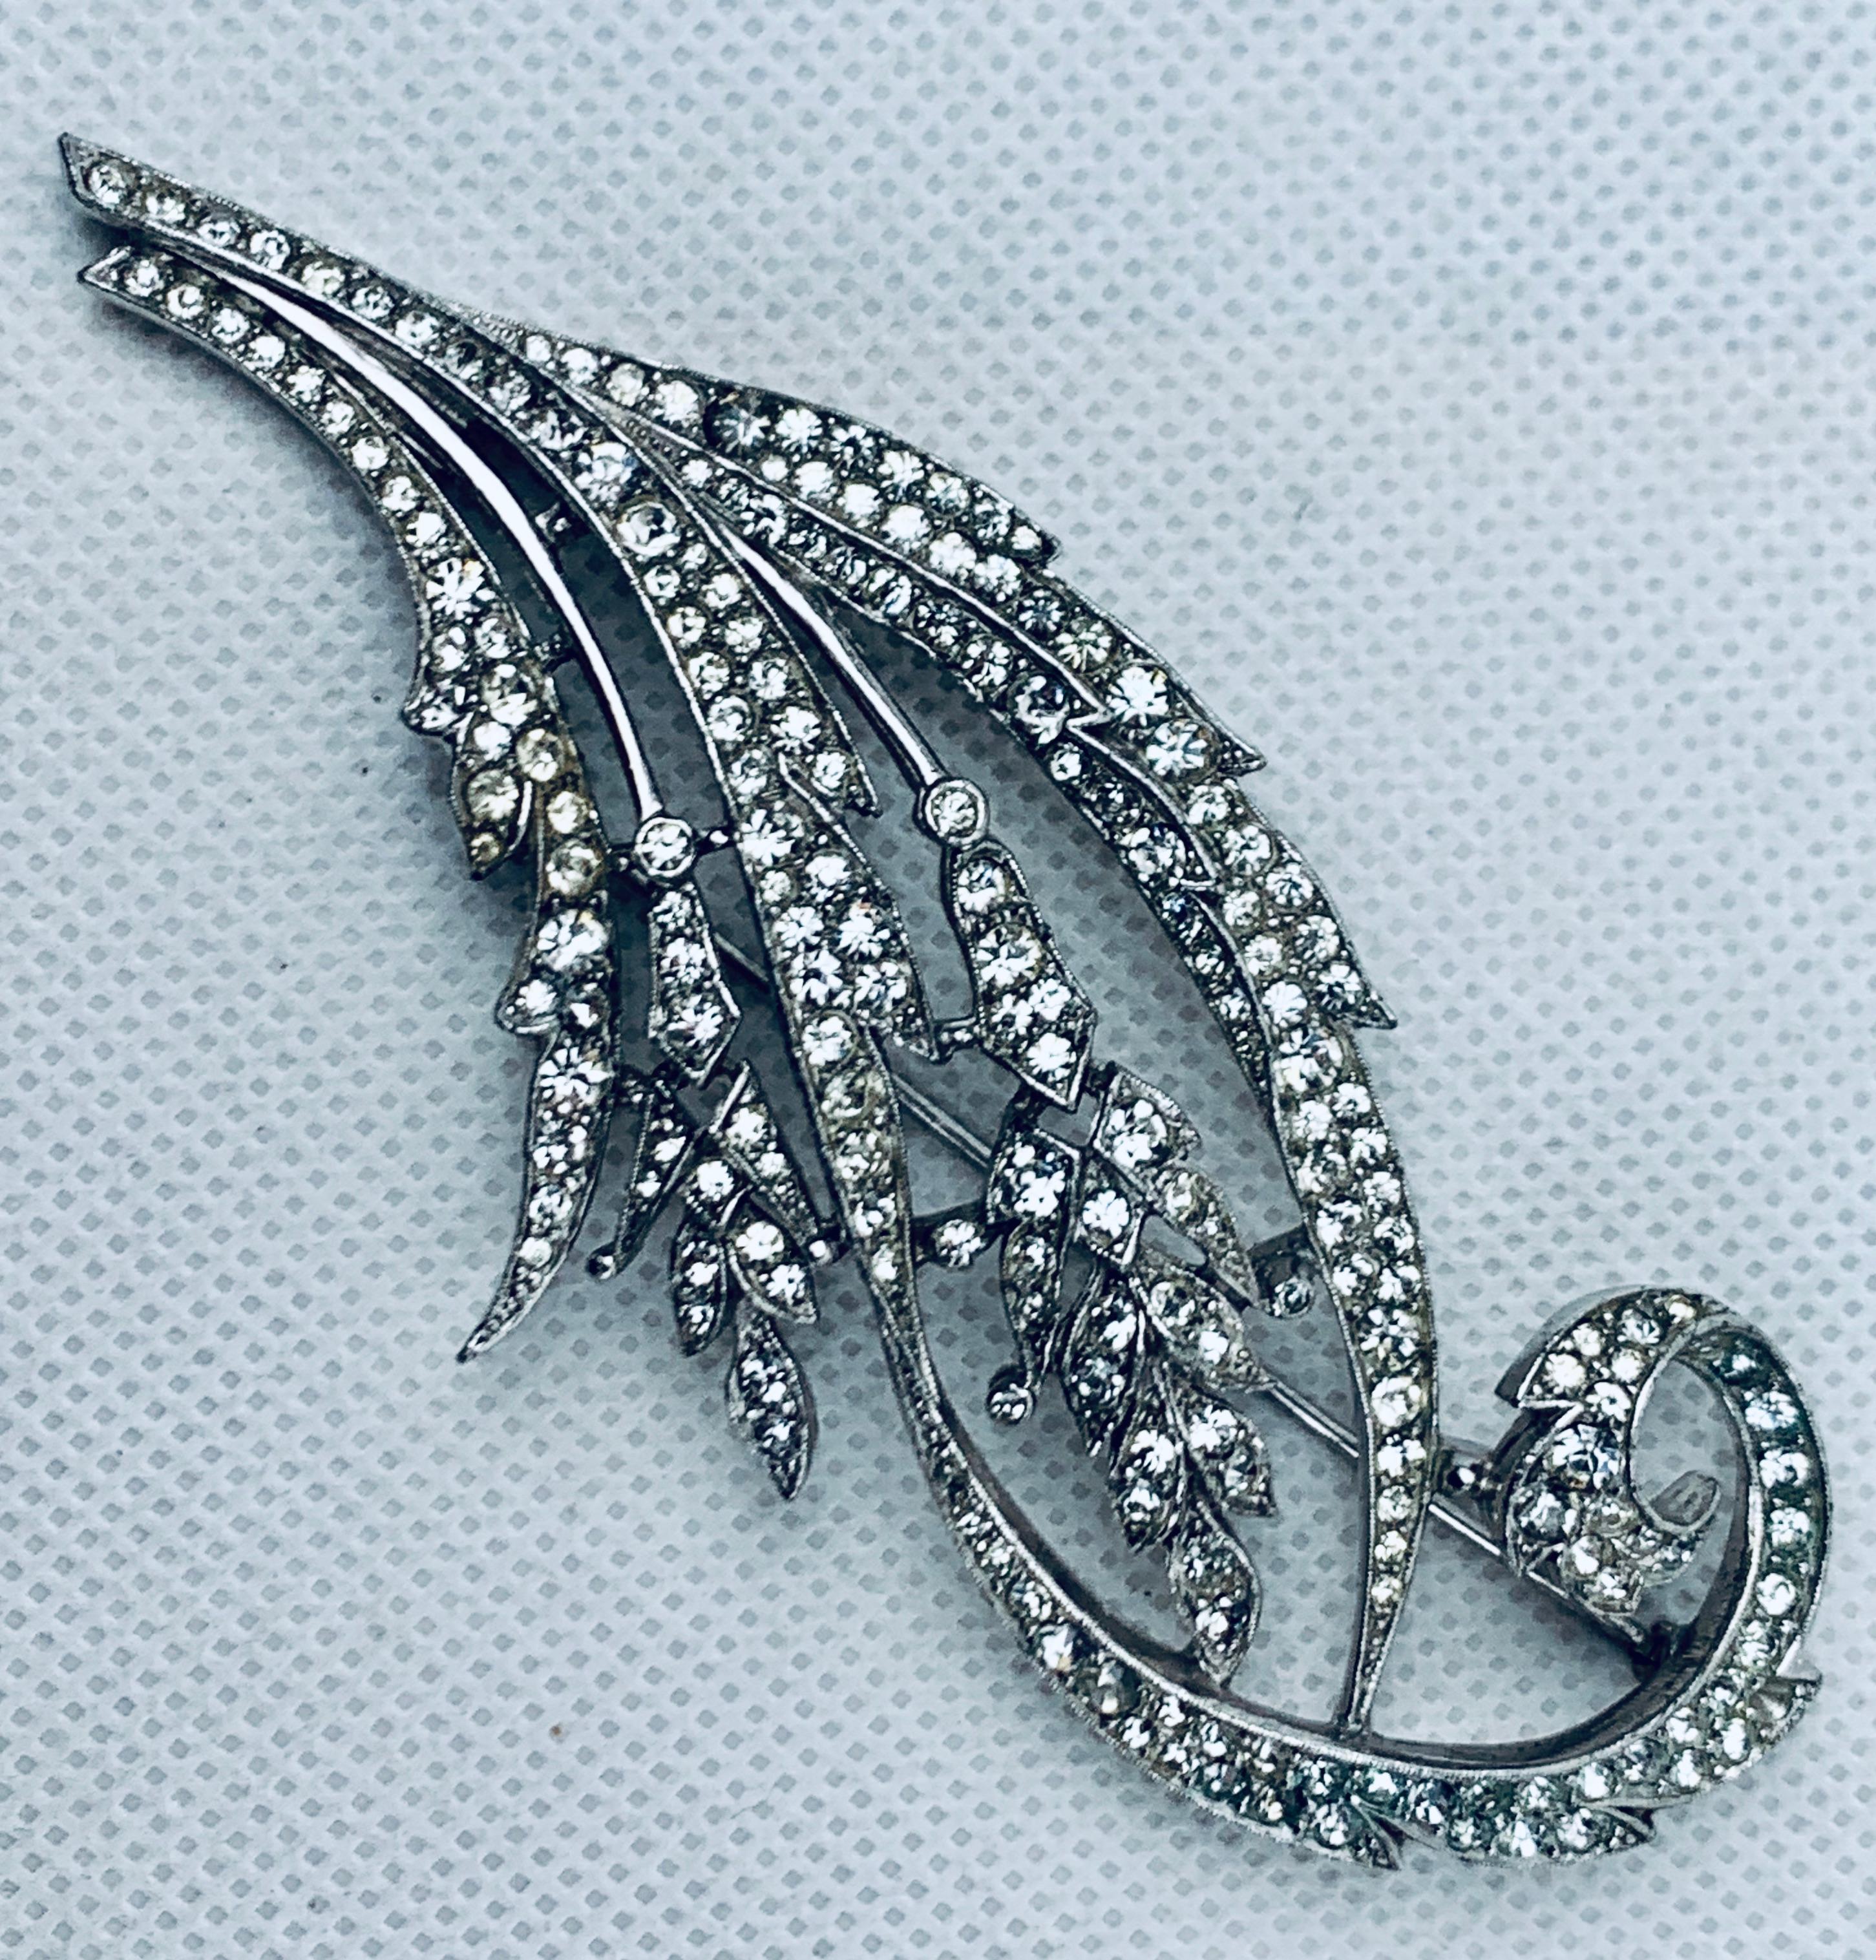 Large leafy spray brooch by Trifari.  The brooch is rhodium plated, however, Trifari had their own method of plating called Trifanium because it resembled platinum.  Their high quality costume jewelry was meant to look like authentic jewelry.
The